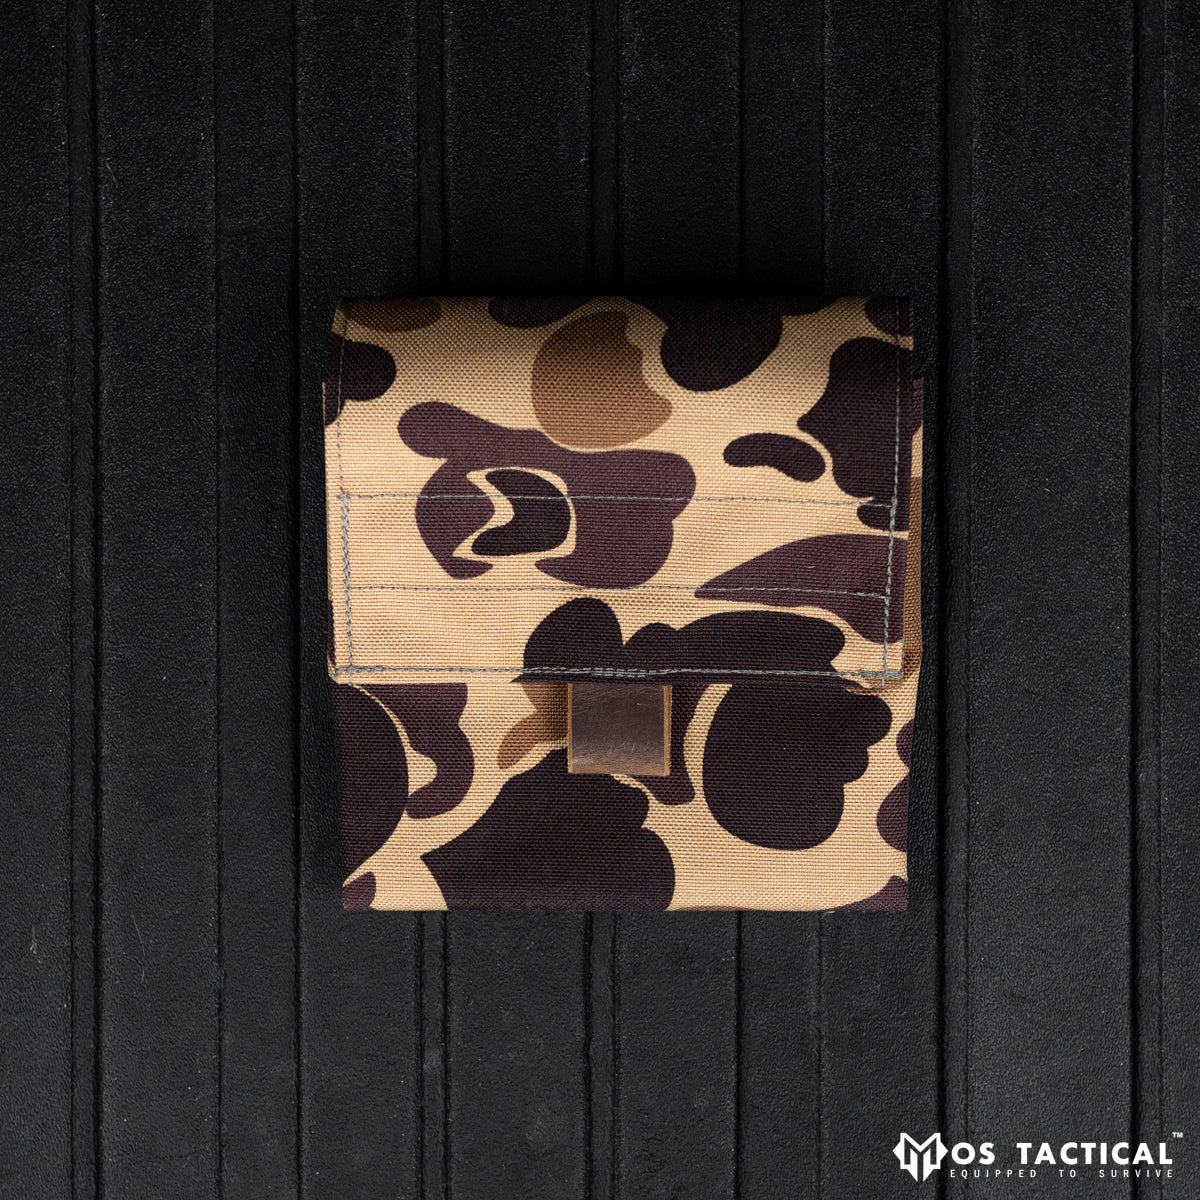 Utility Pouch in Vintage Duck Camo with “Predator” Leather